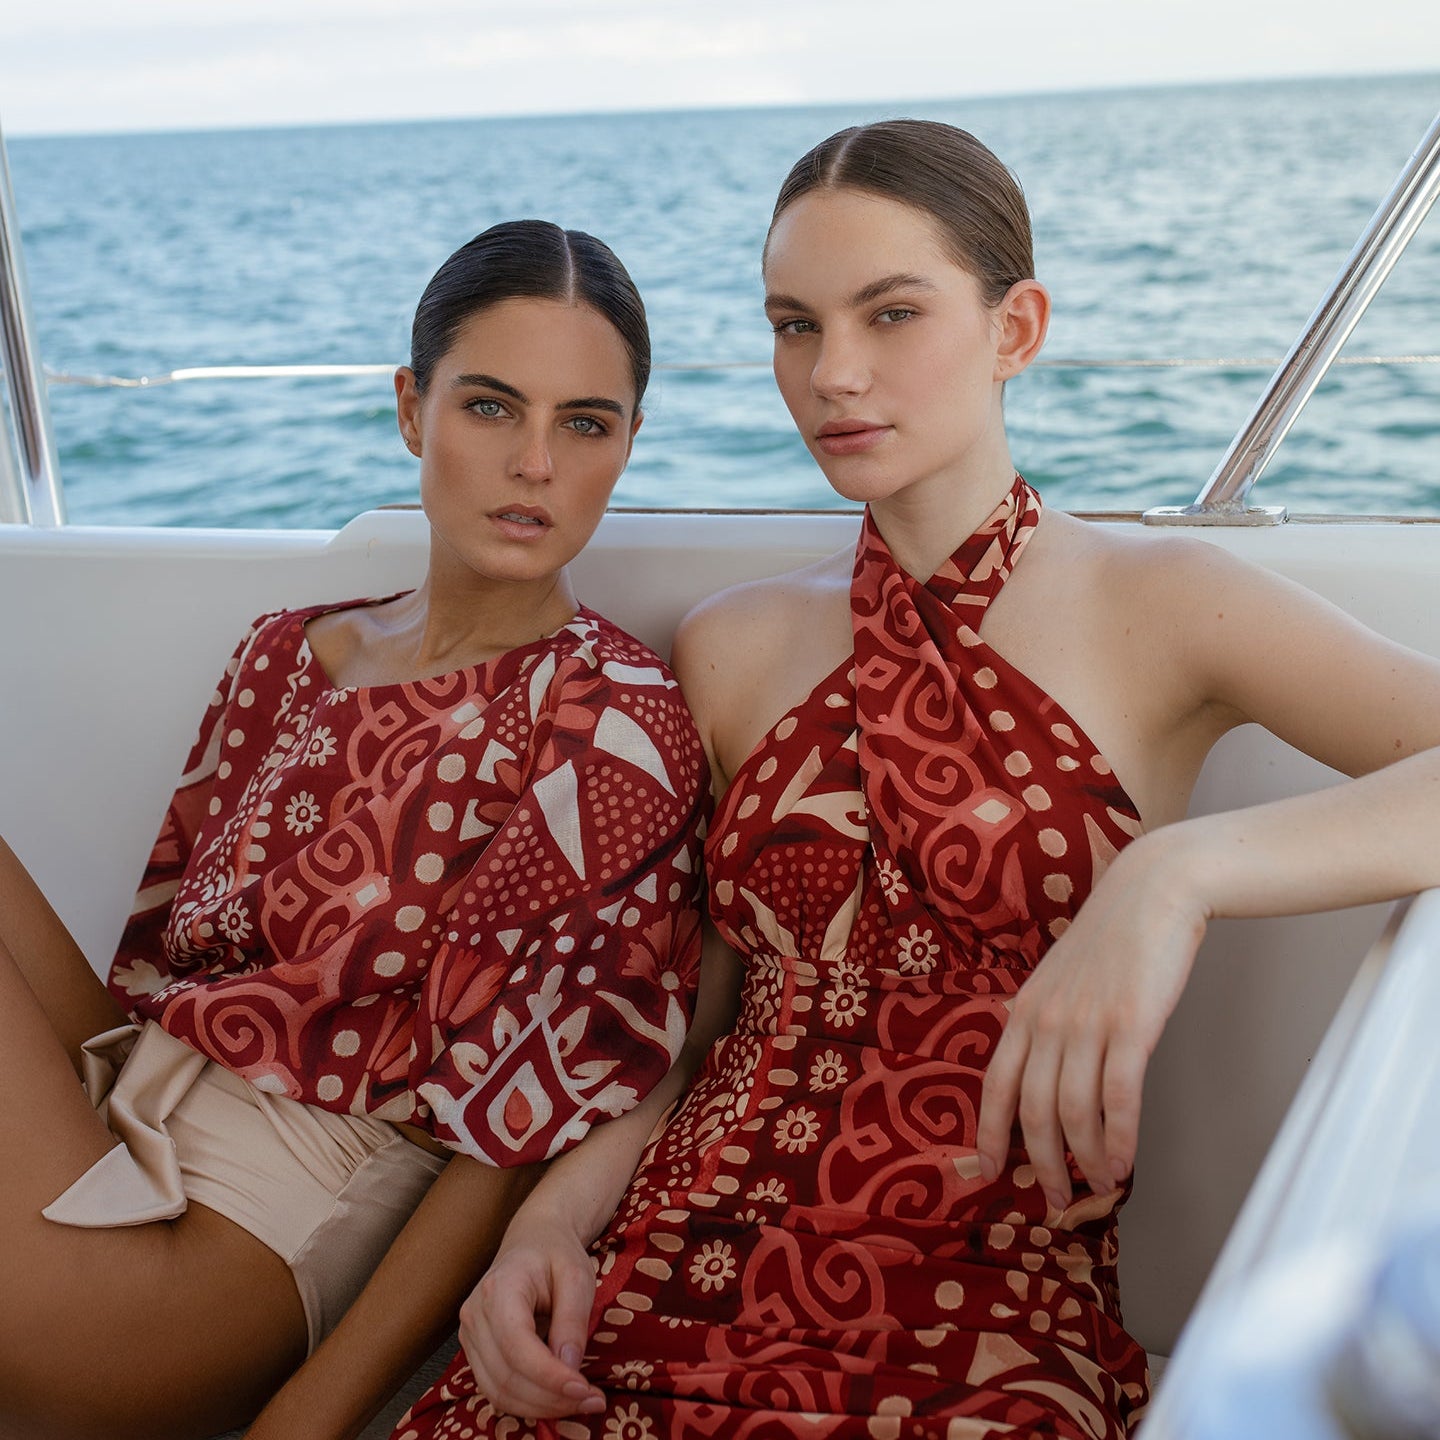 Encantadore Swimwear and Resortwear: A Brand with Heart and Purpose - EVAMAIA